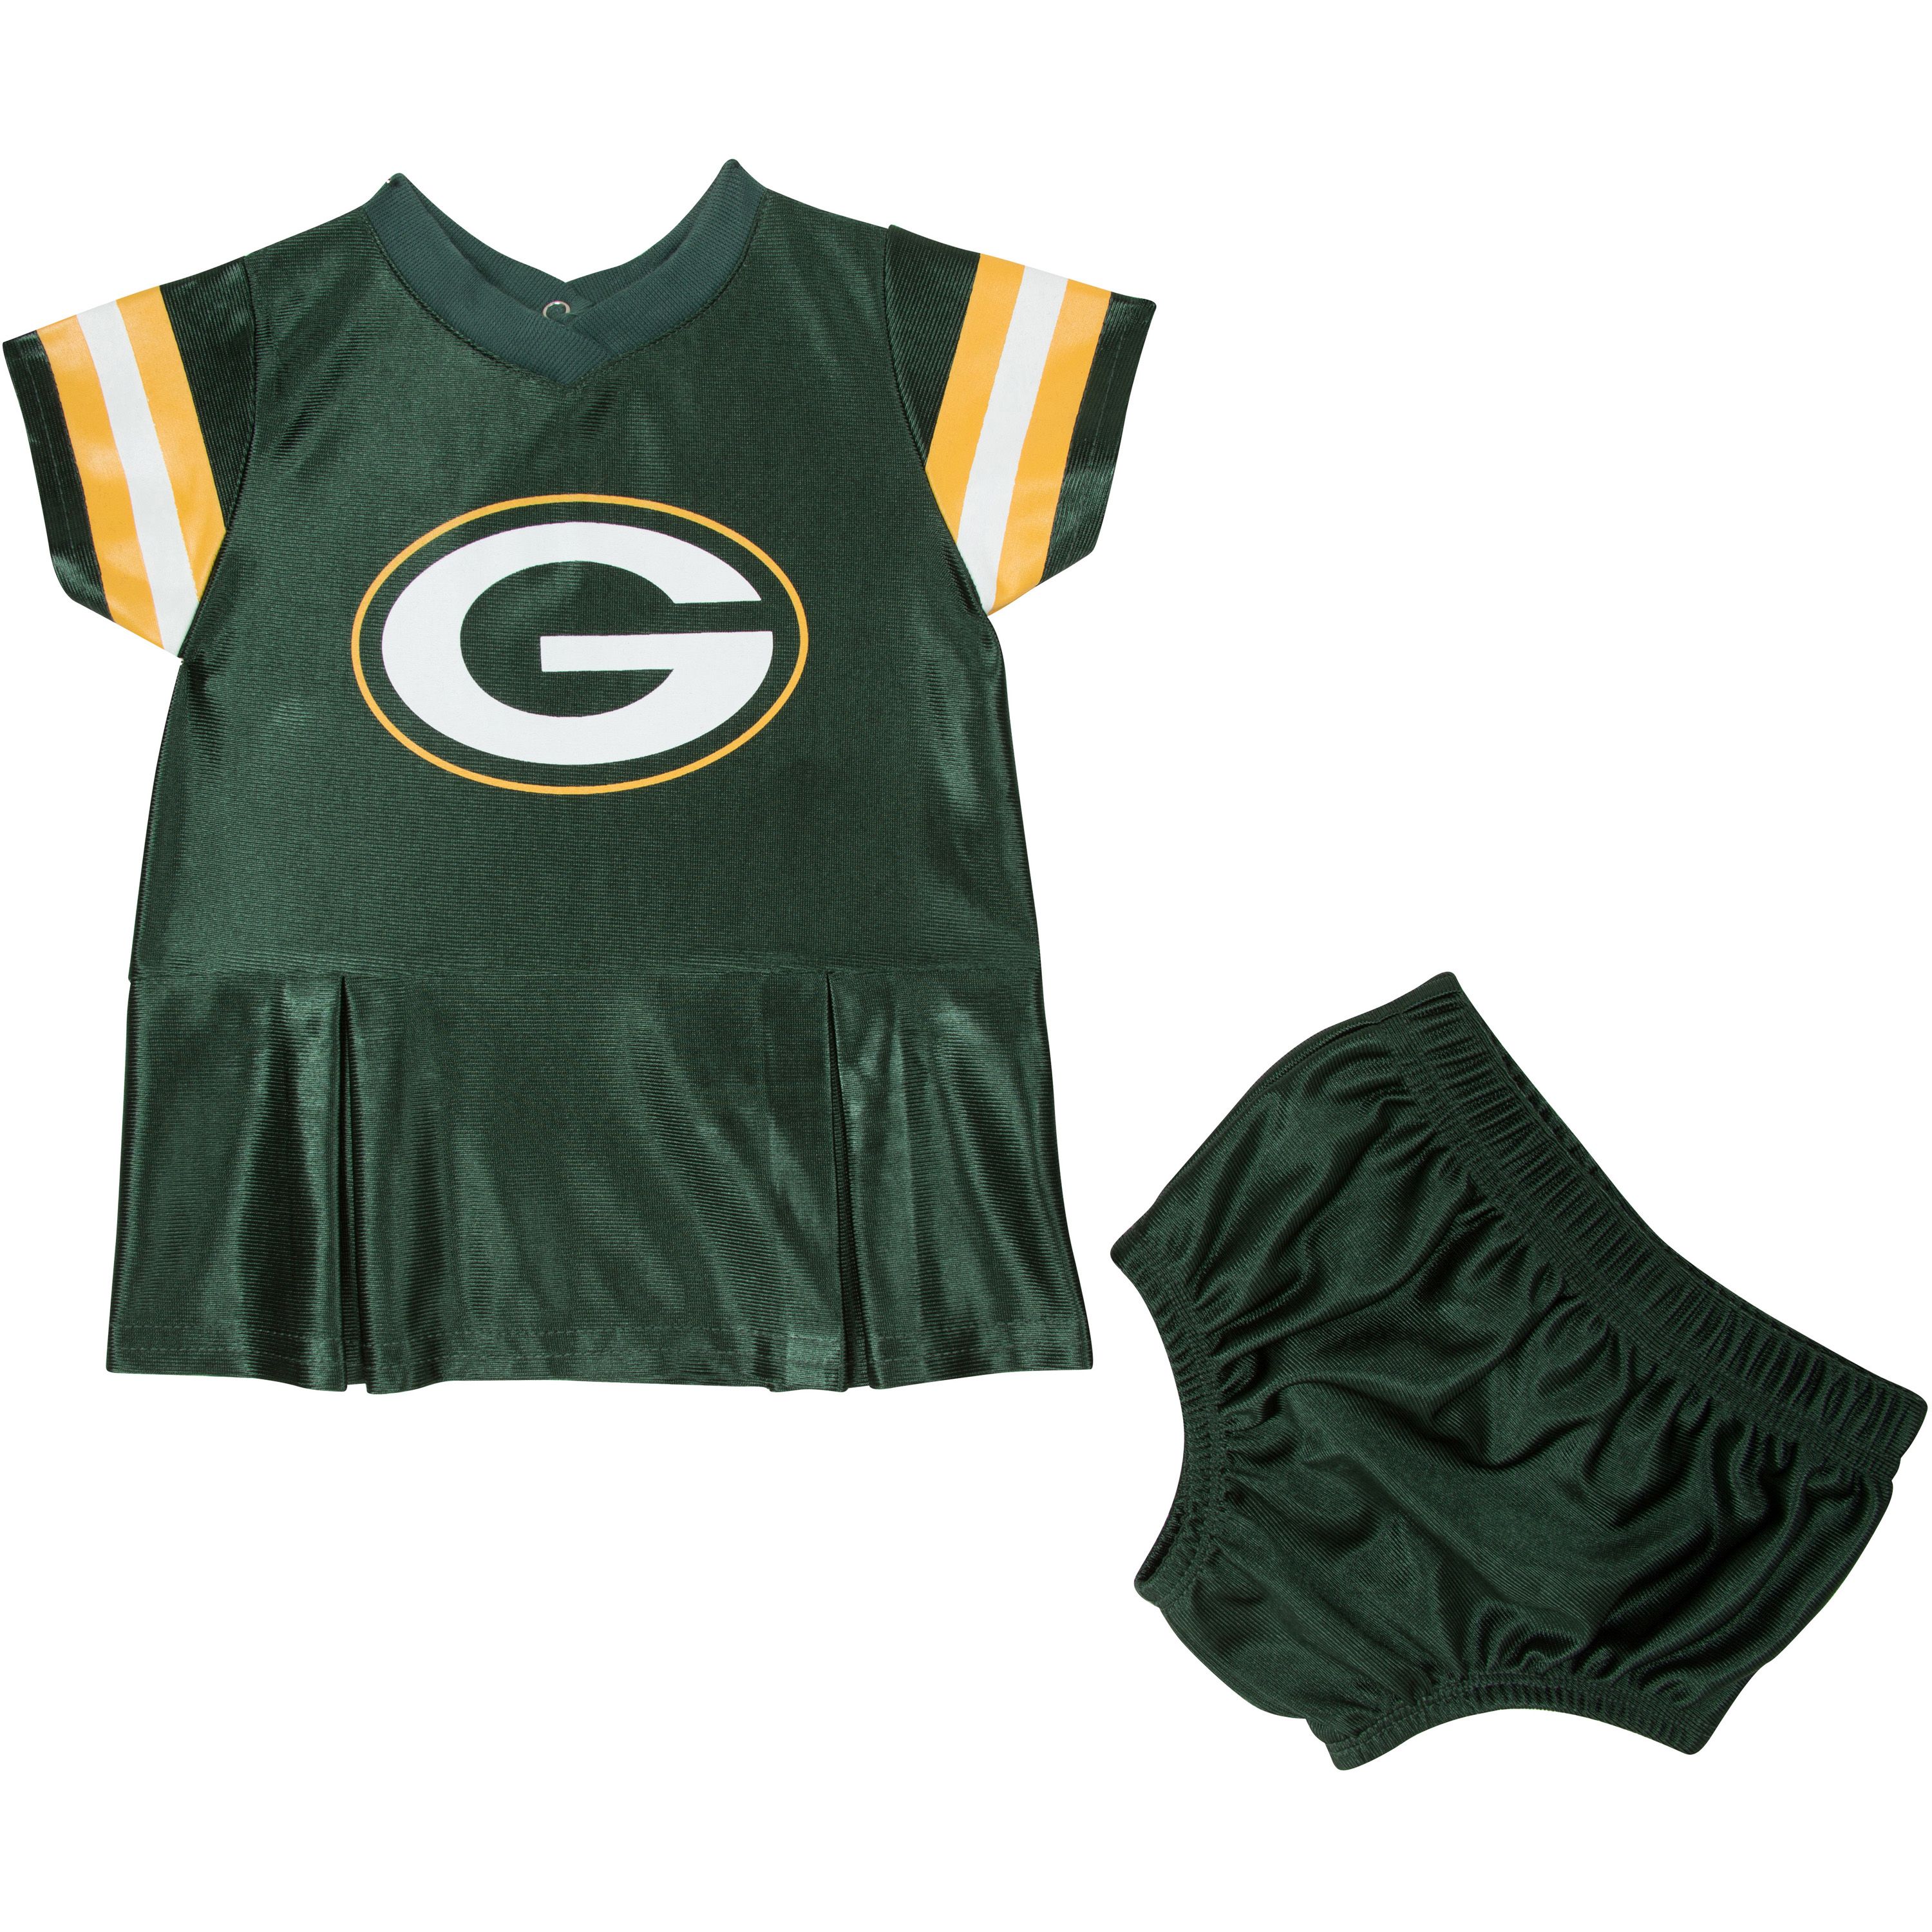 infant packers jersey